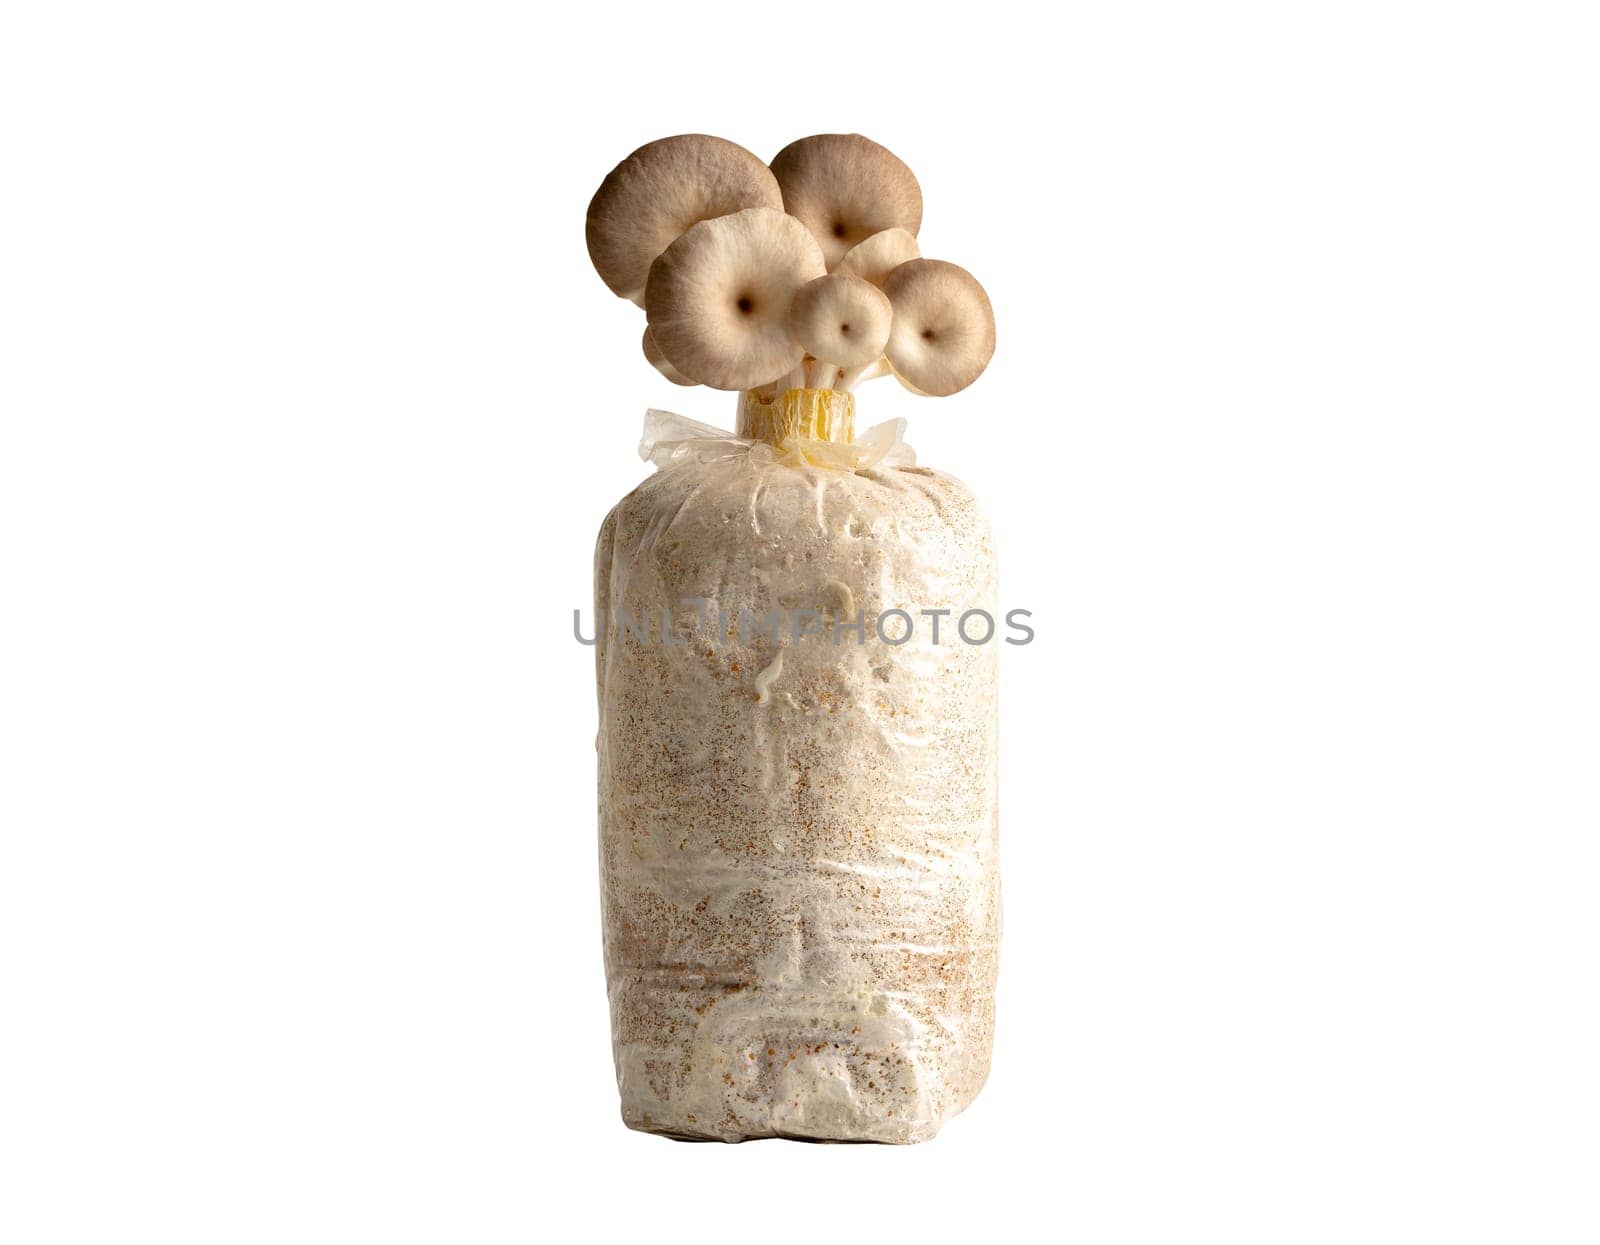 Mushroom cultivation, Indian Oyster, Phoenix Mushroom, Lung Oyster on soil in plastic bag isolated on white background with clipping path.